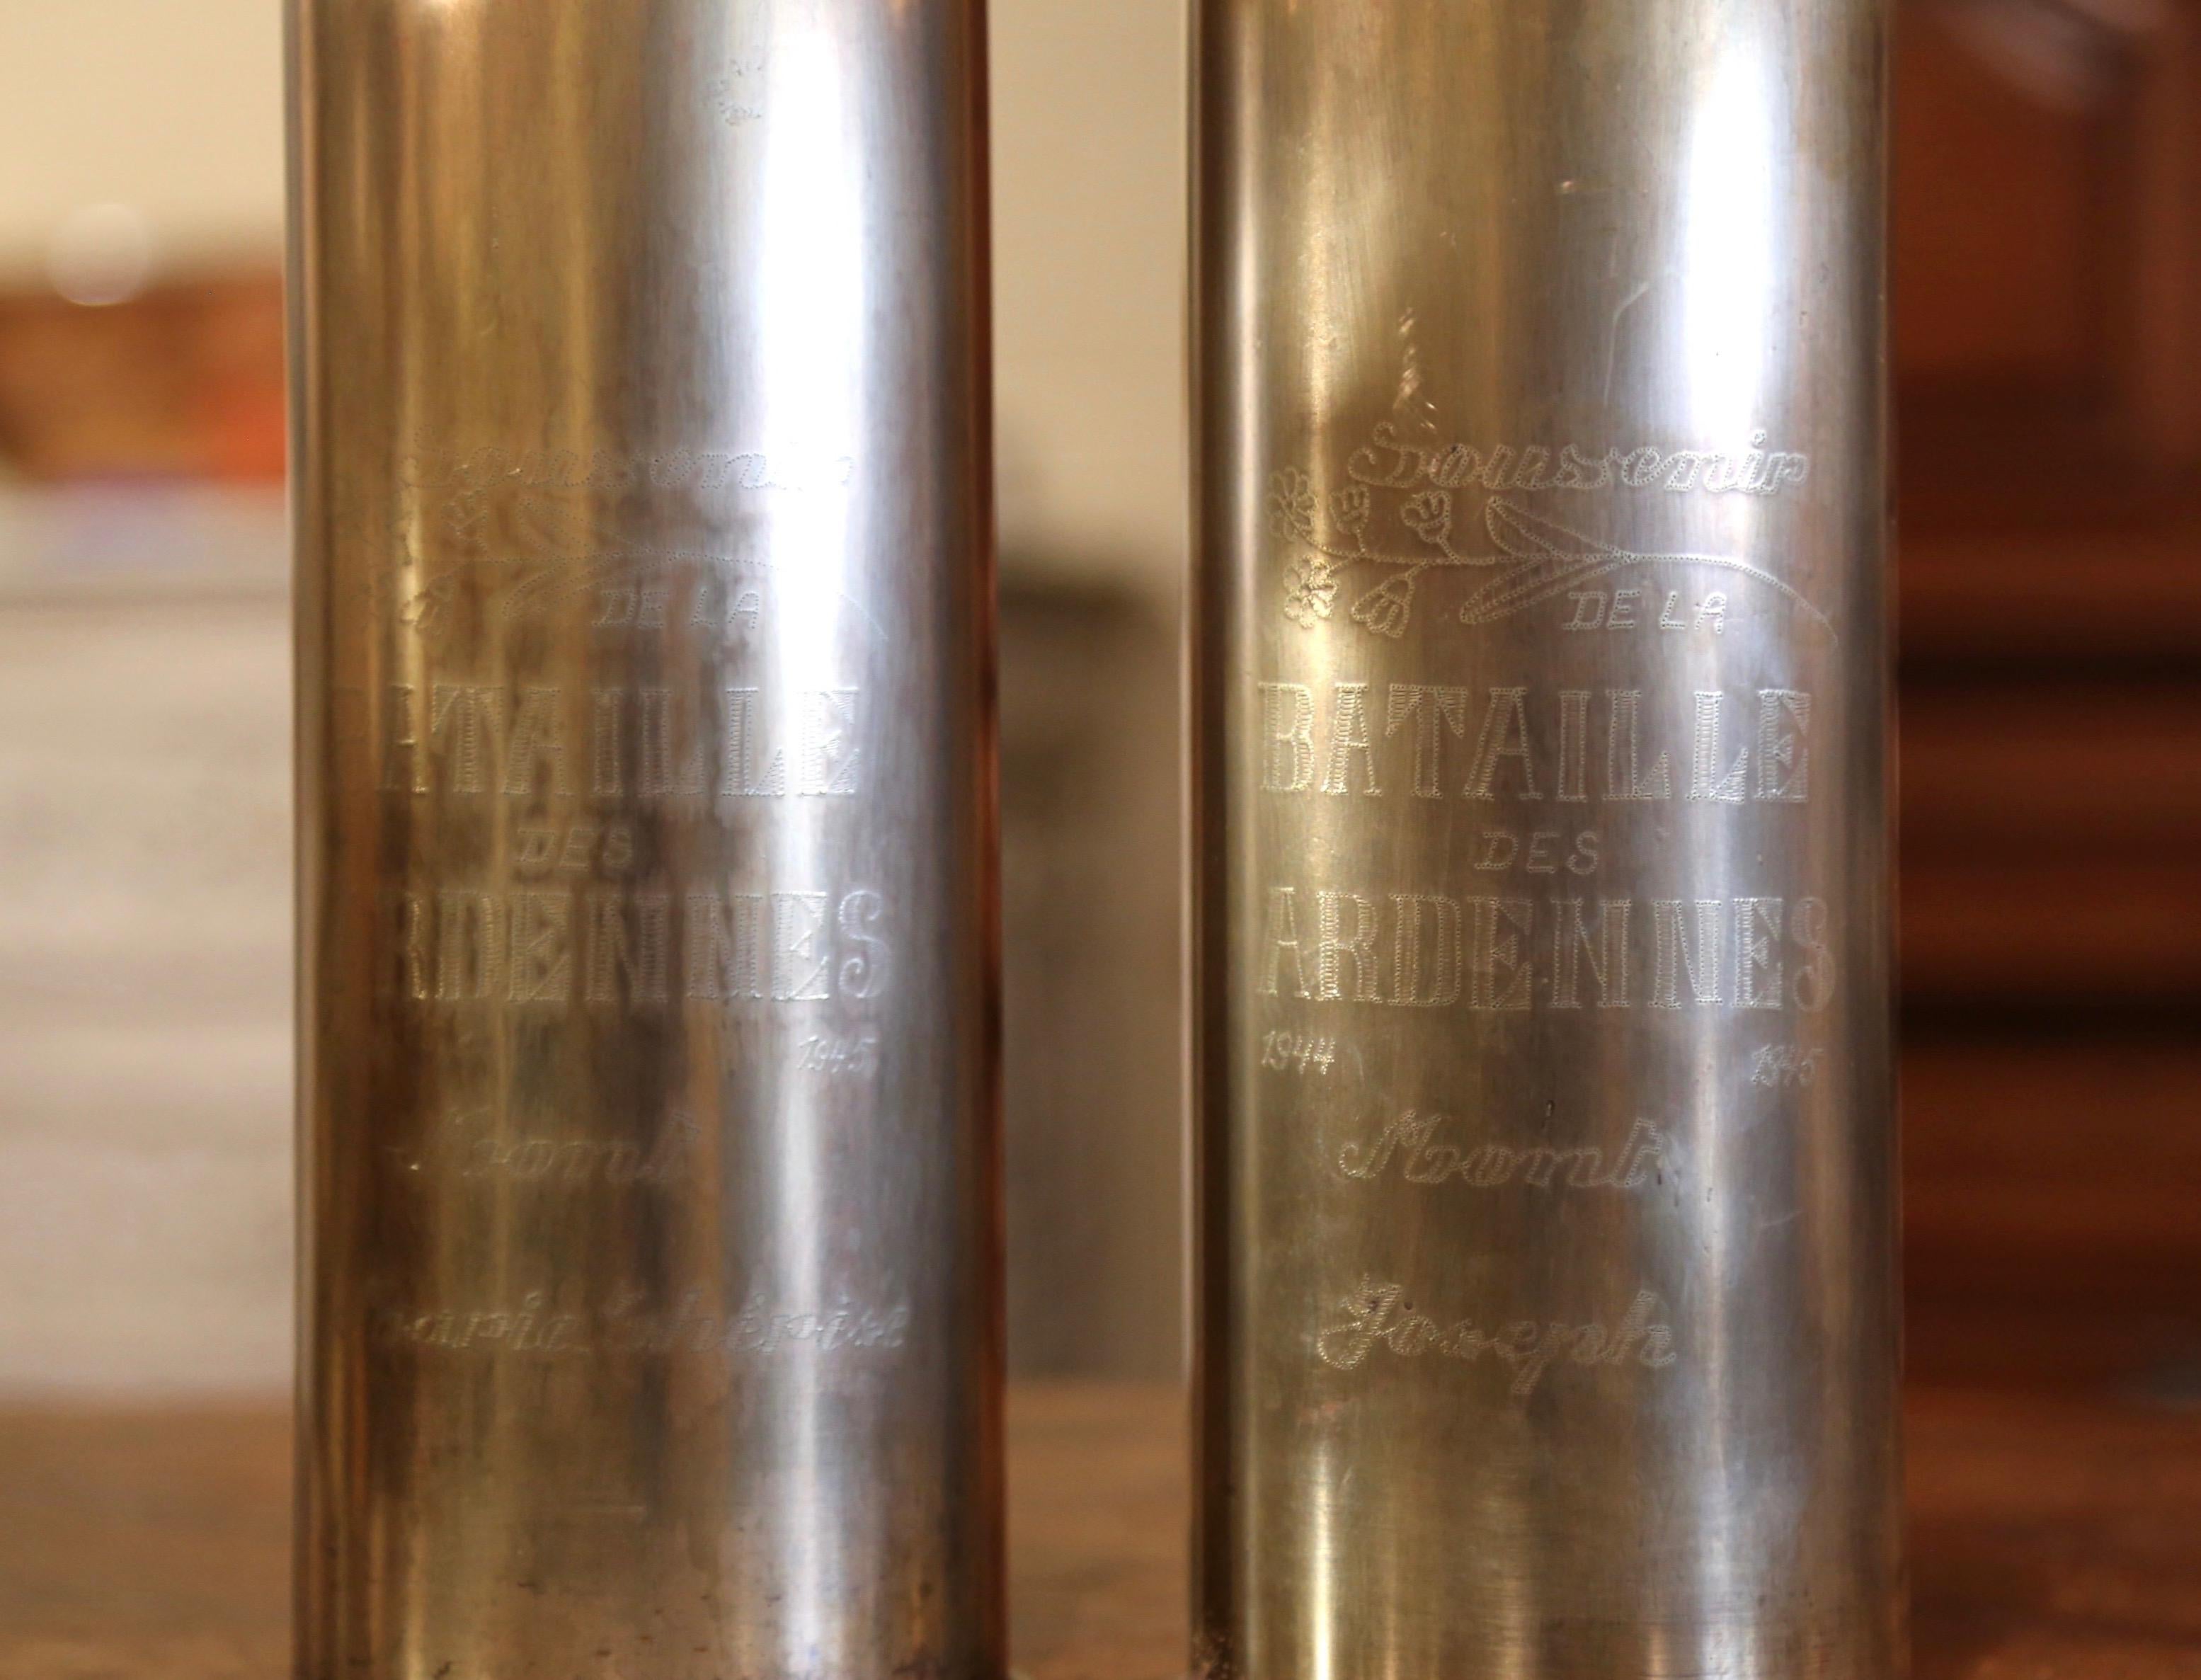 Decorate a man's office or a study display shelf with this pair of antique trench art shell vases commemorating the battle of the Bulge. Made of brass and dated 1944 on the bottom, the artillery shell casings feature the following engraved